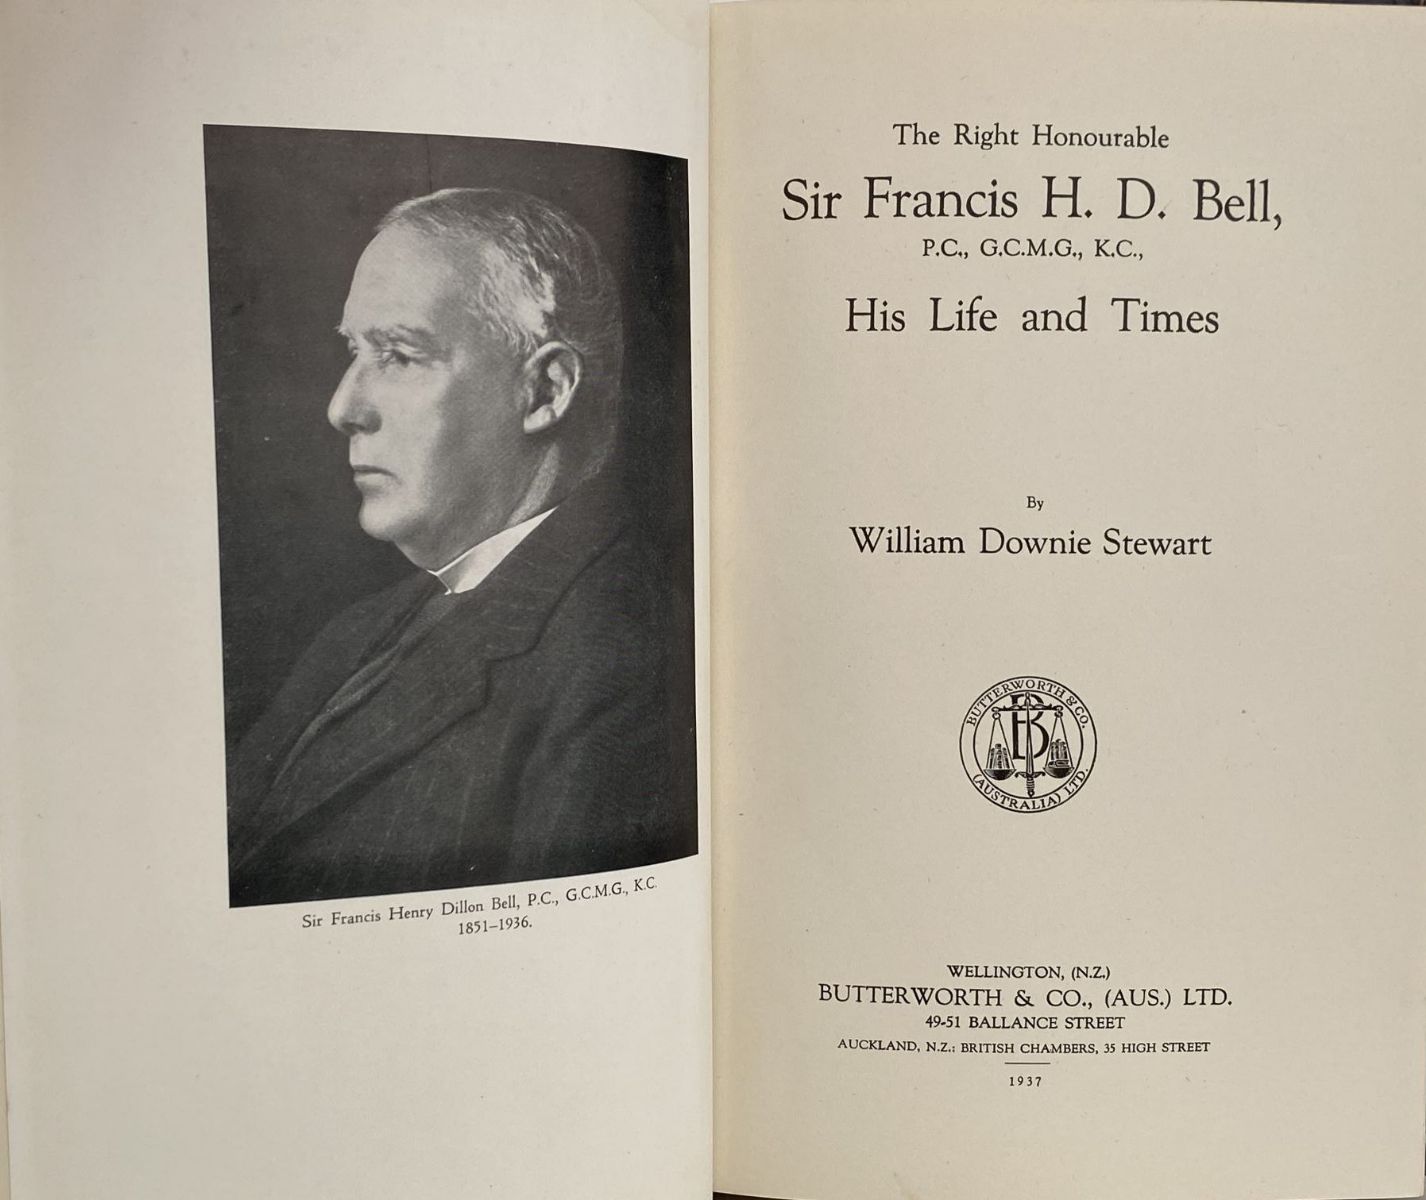 SIR FRANCIS H. D. BELL: His Life and Times